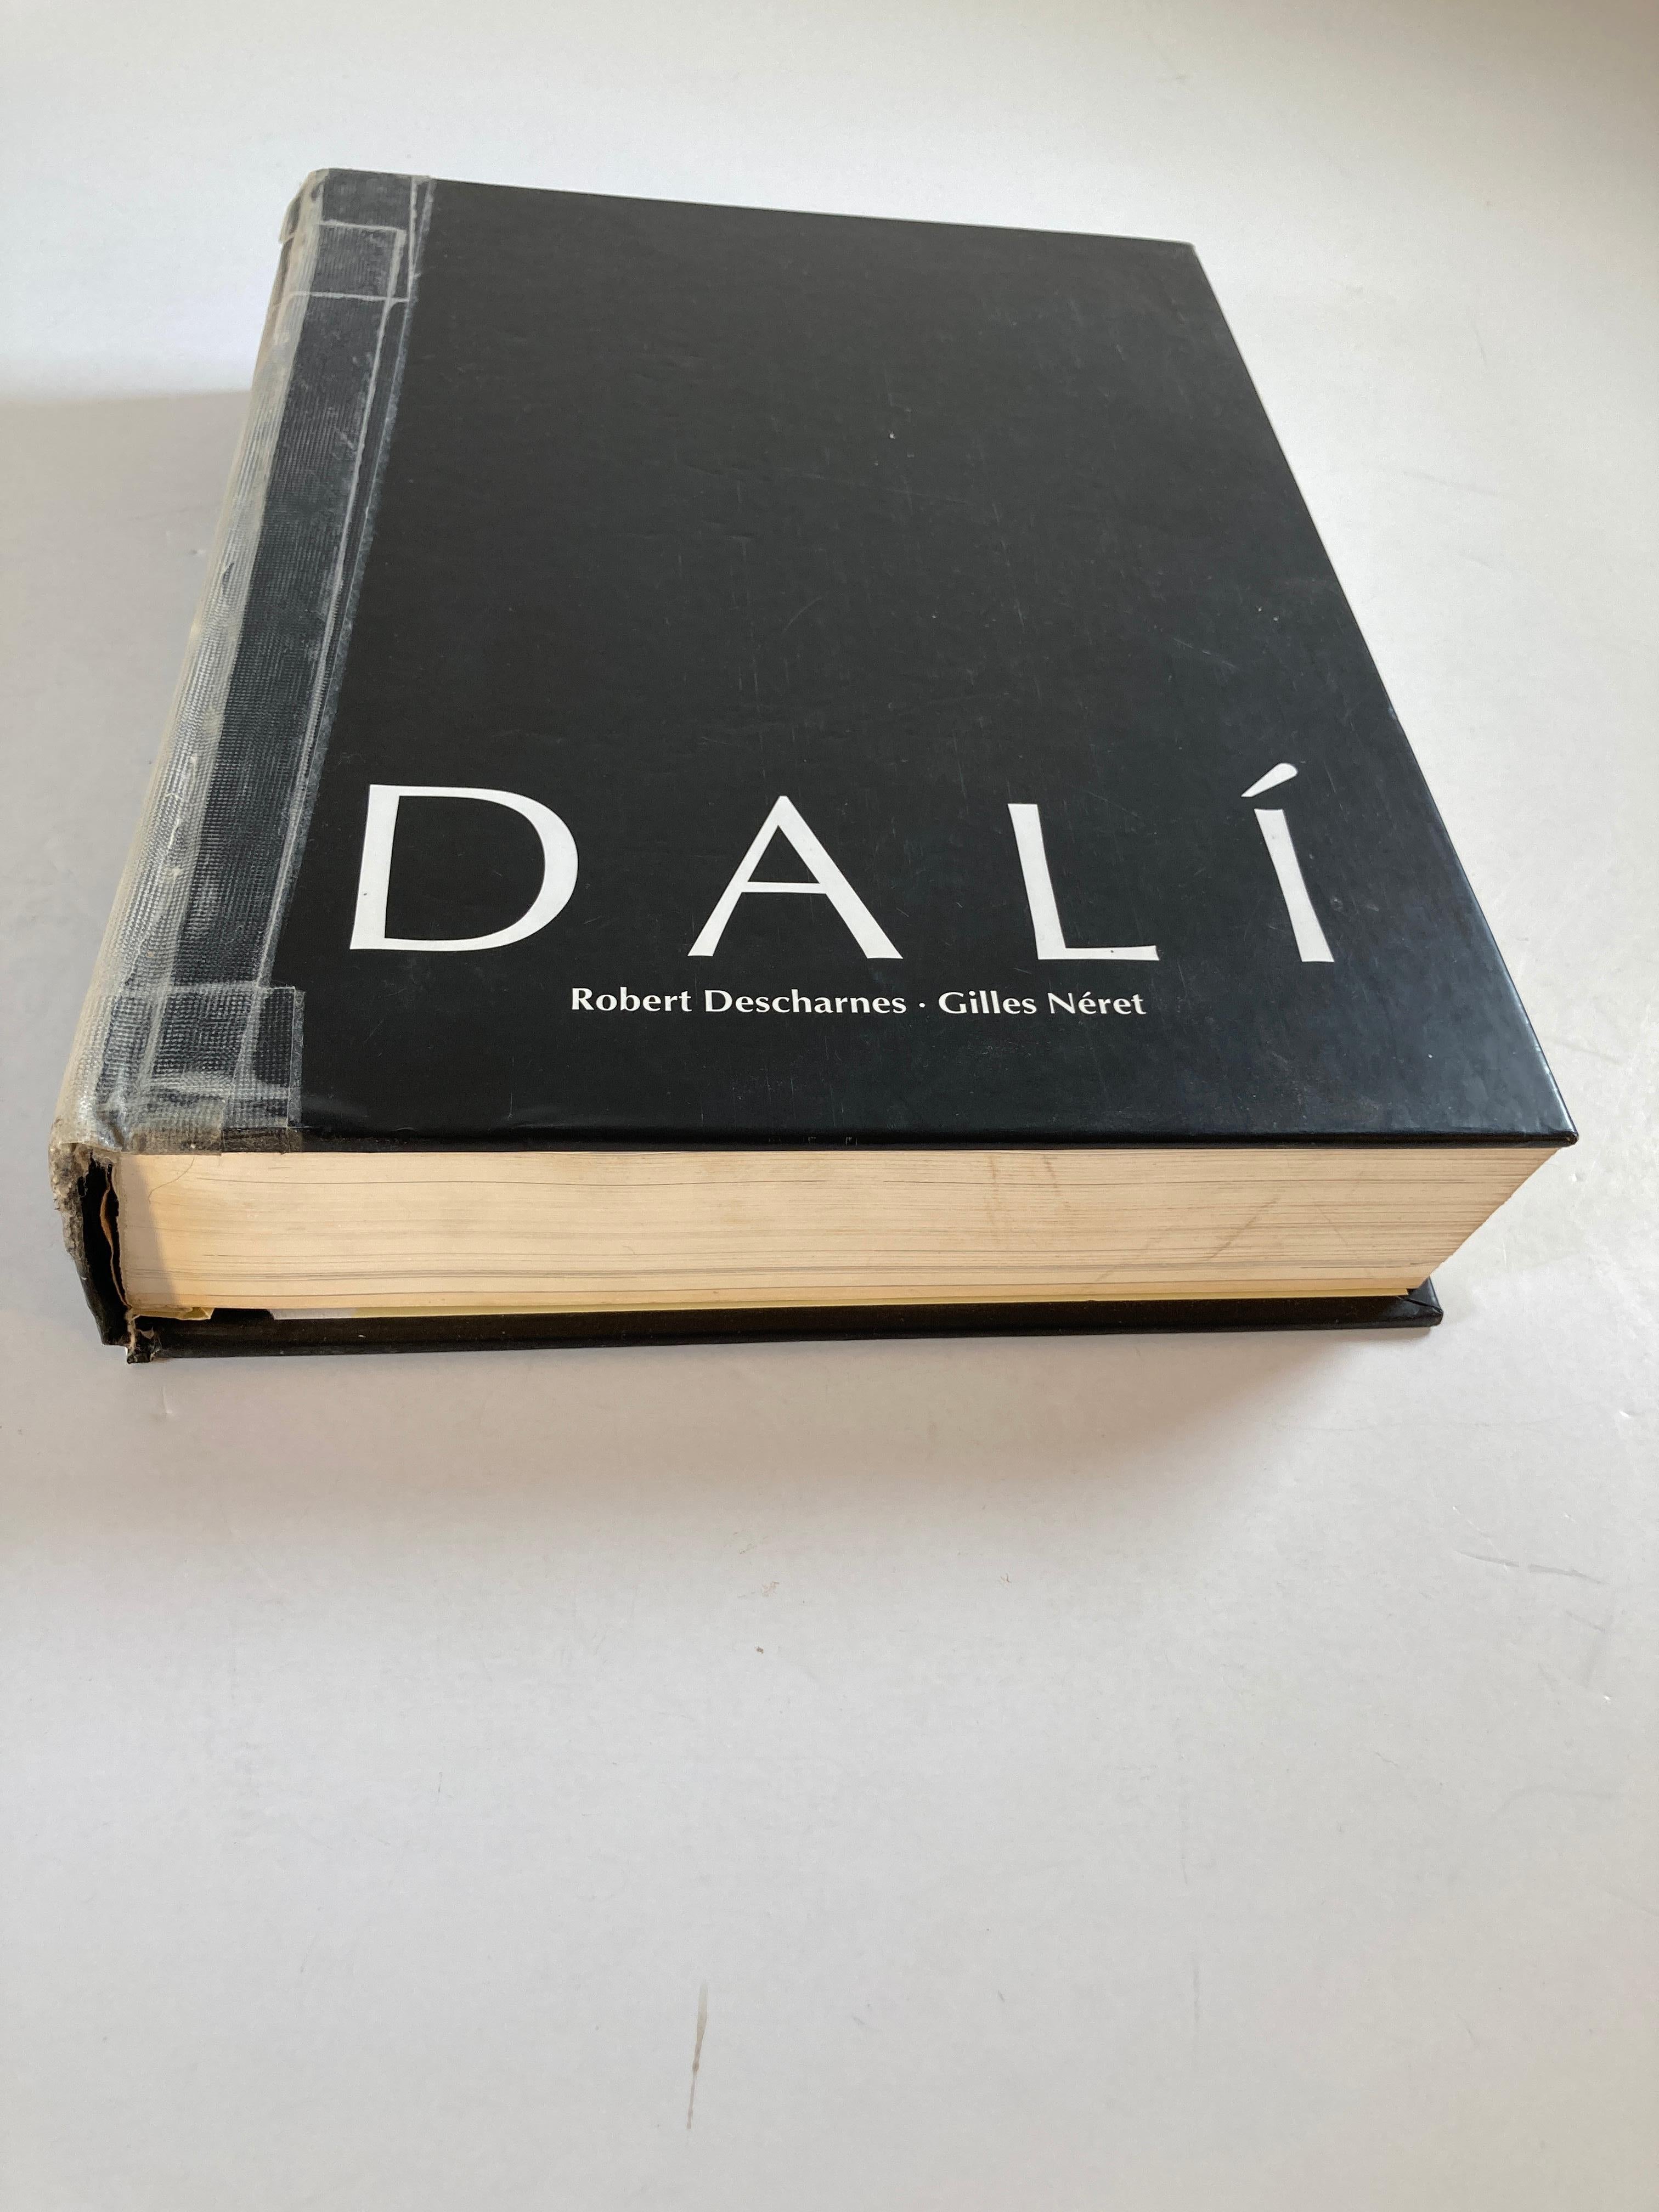 Dali The Work and the Man by Robert Descharnes Hardcover Coffee Table Art Book For Sale 4